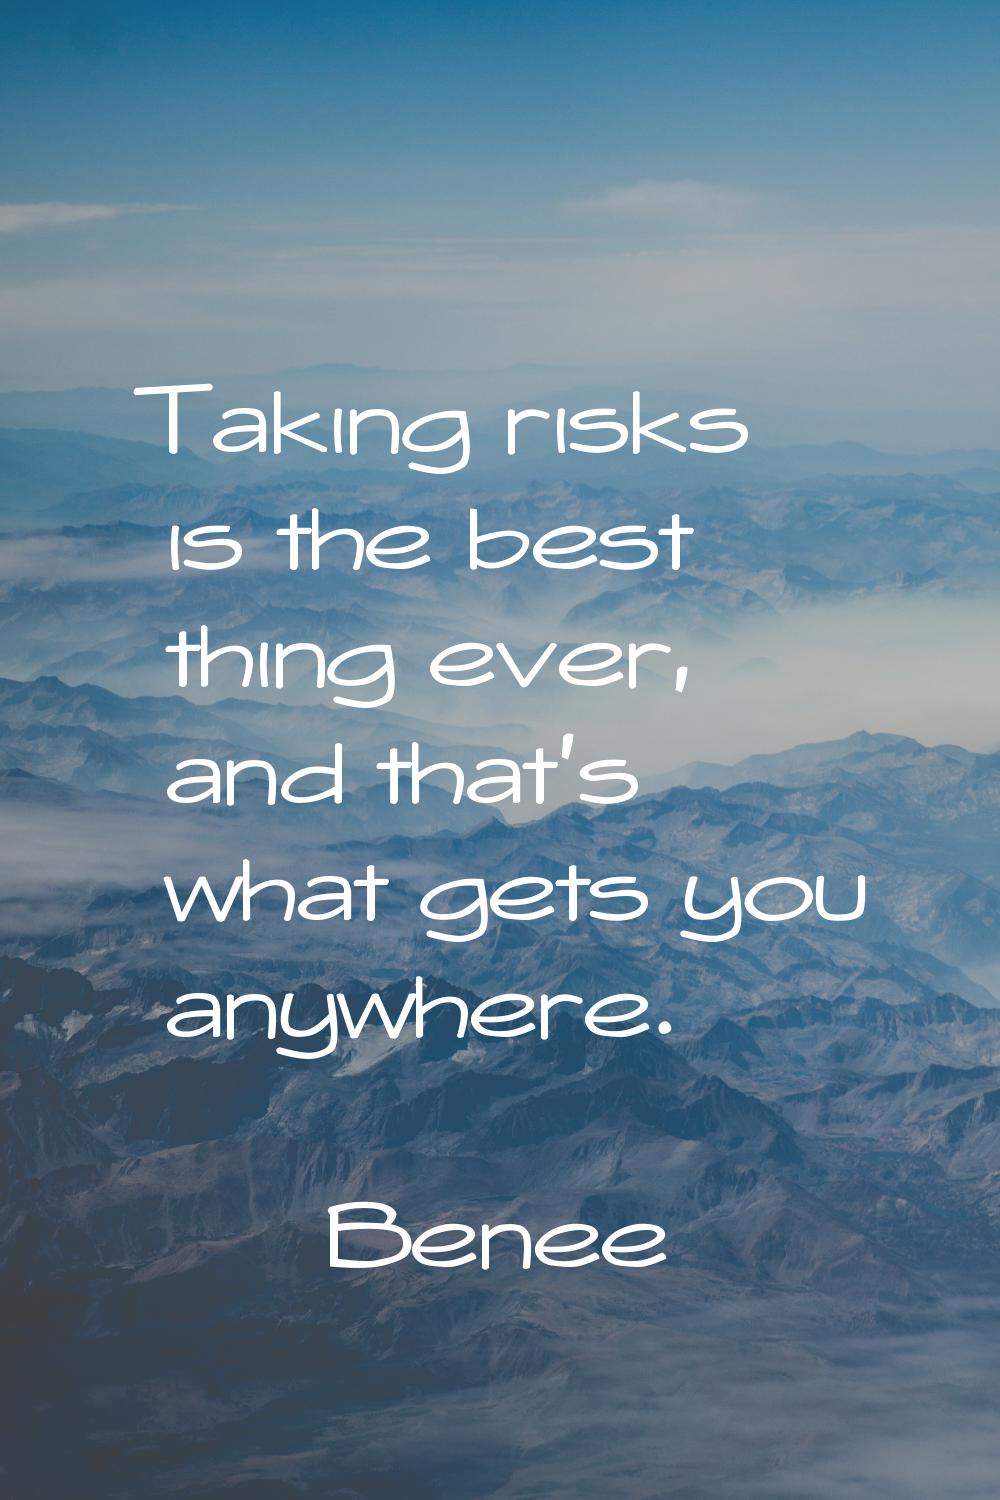 Taking risks is the best thing ever, and that's what gets you anywhere.